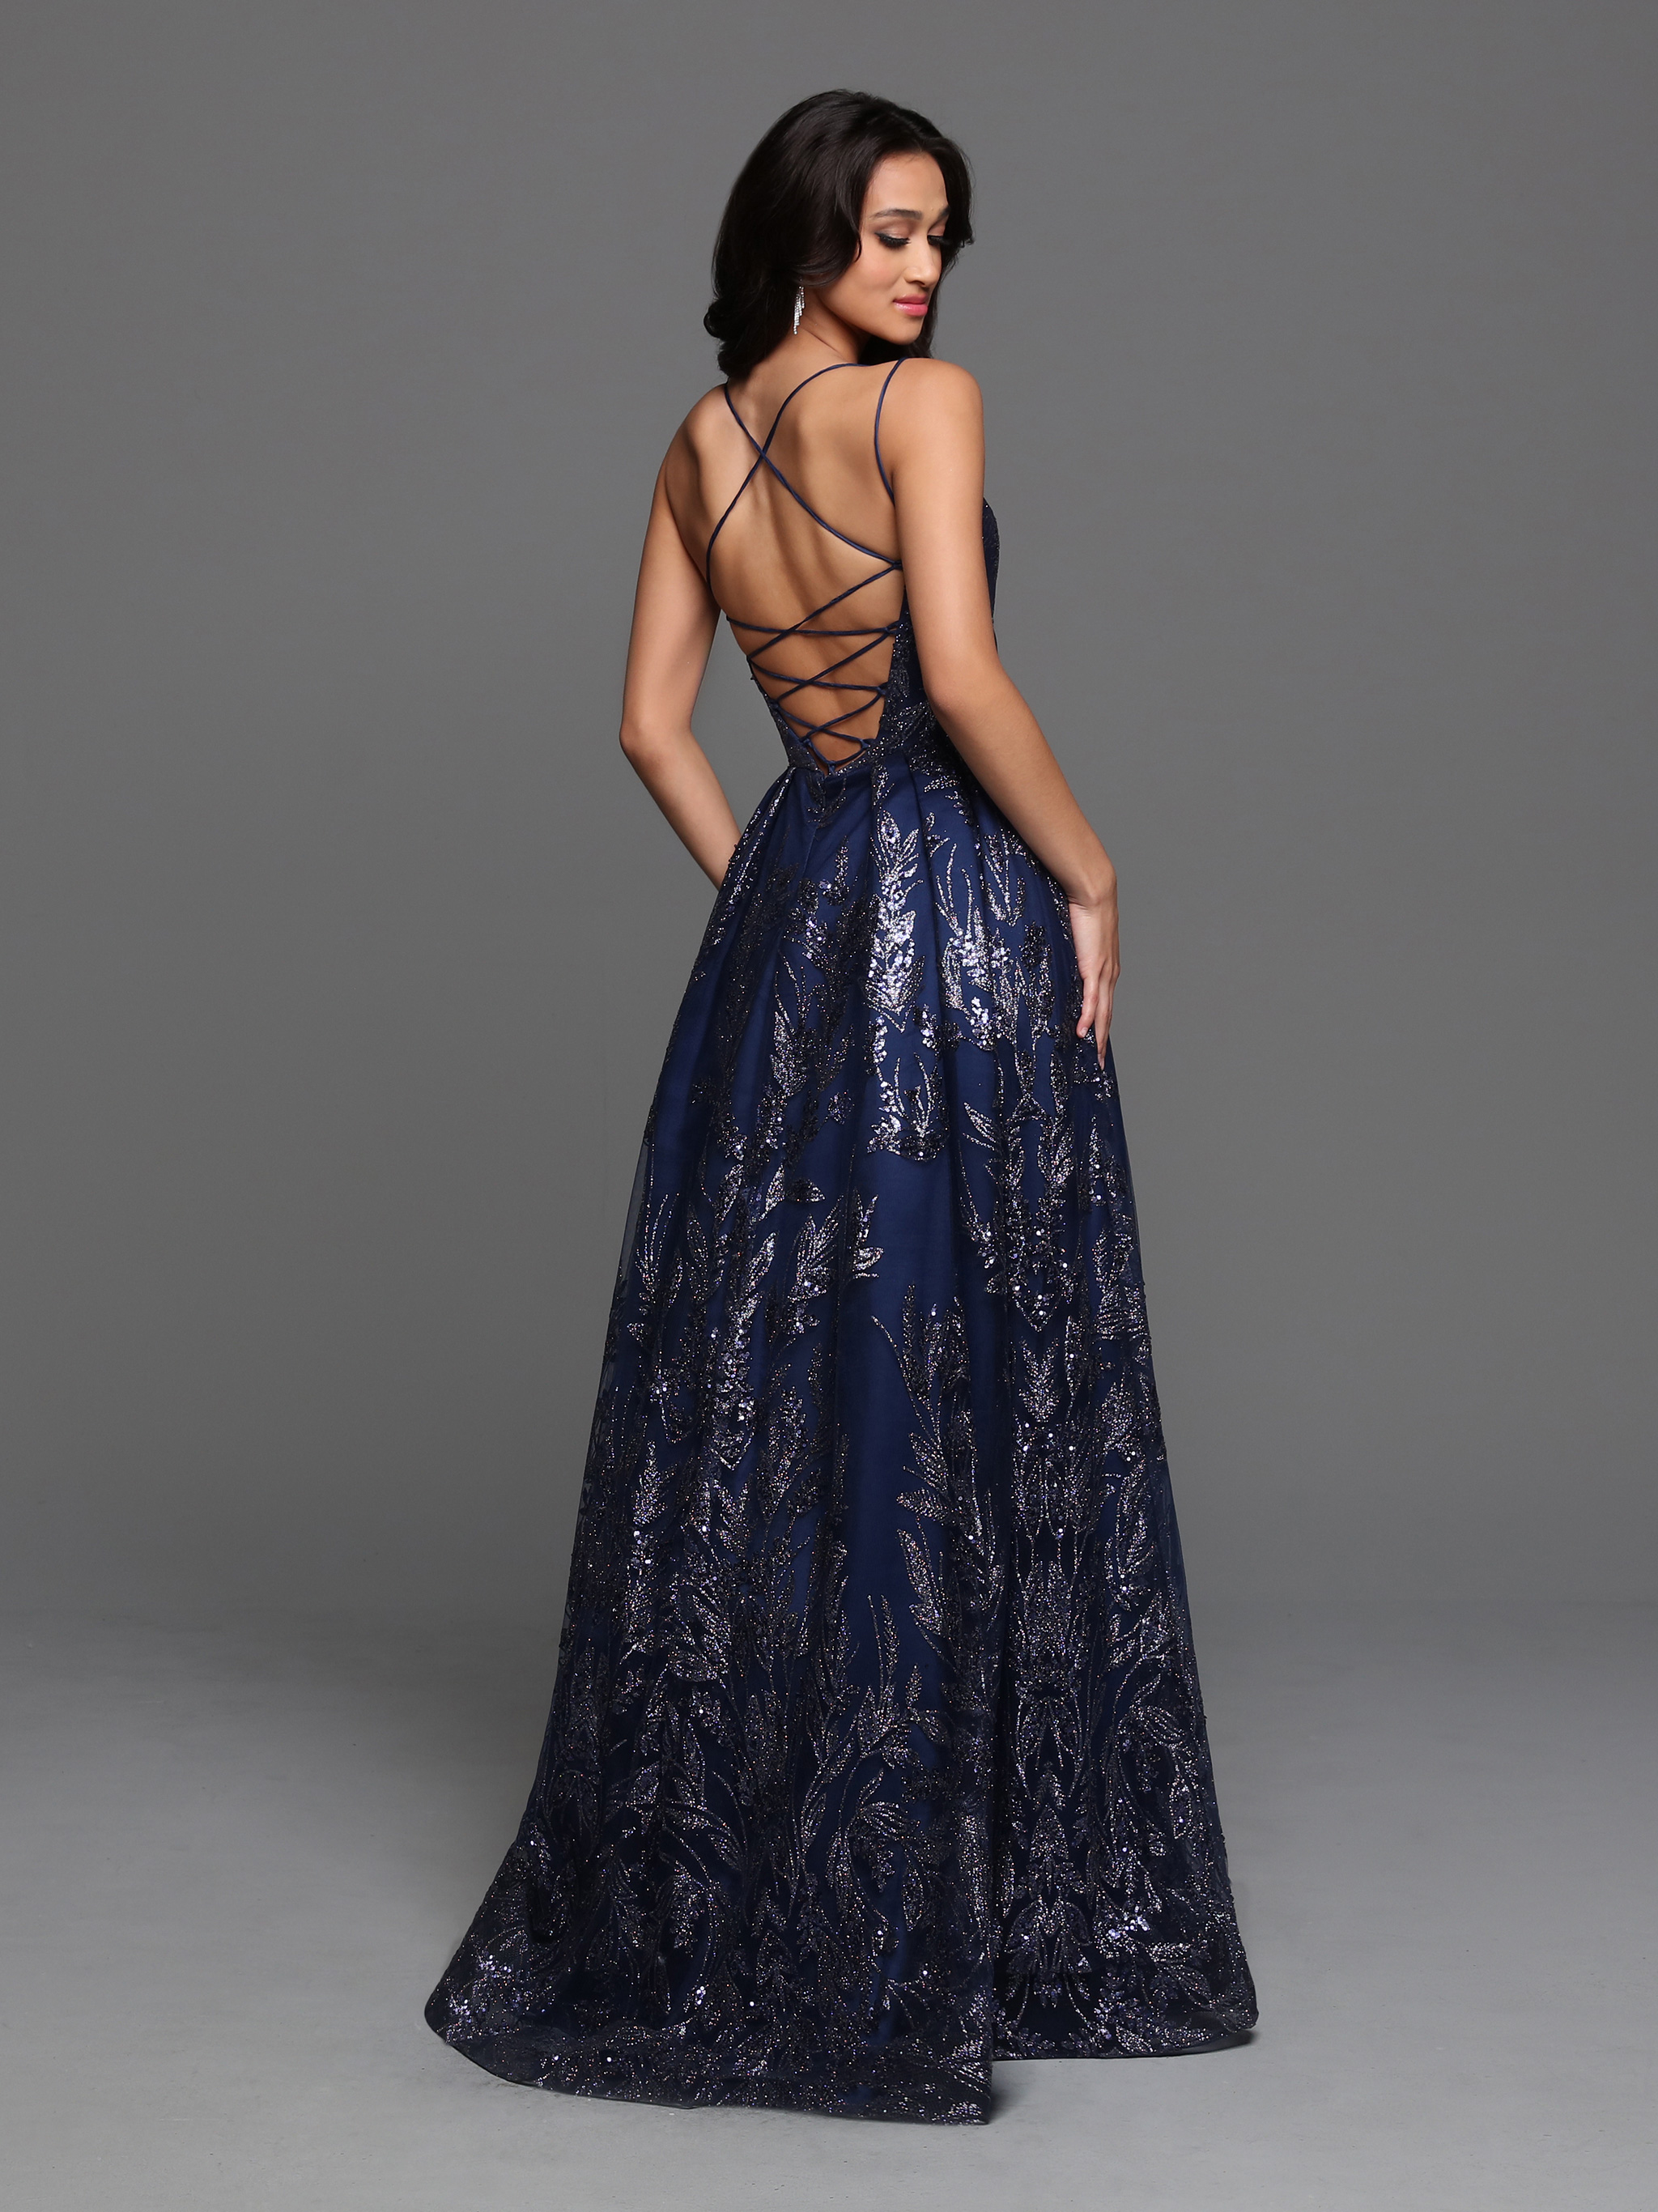 Image showing back view of style #72292